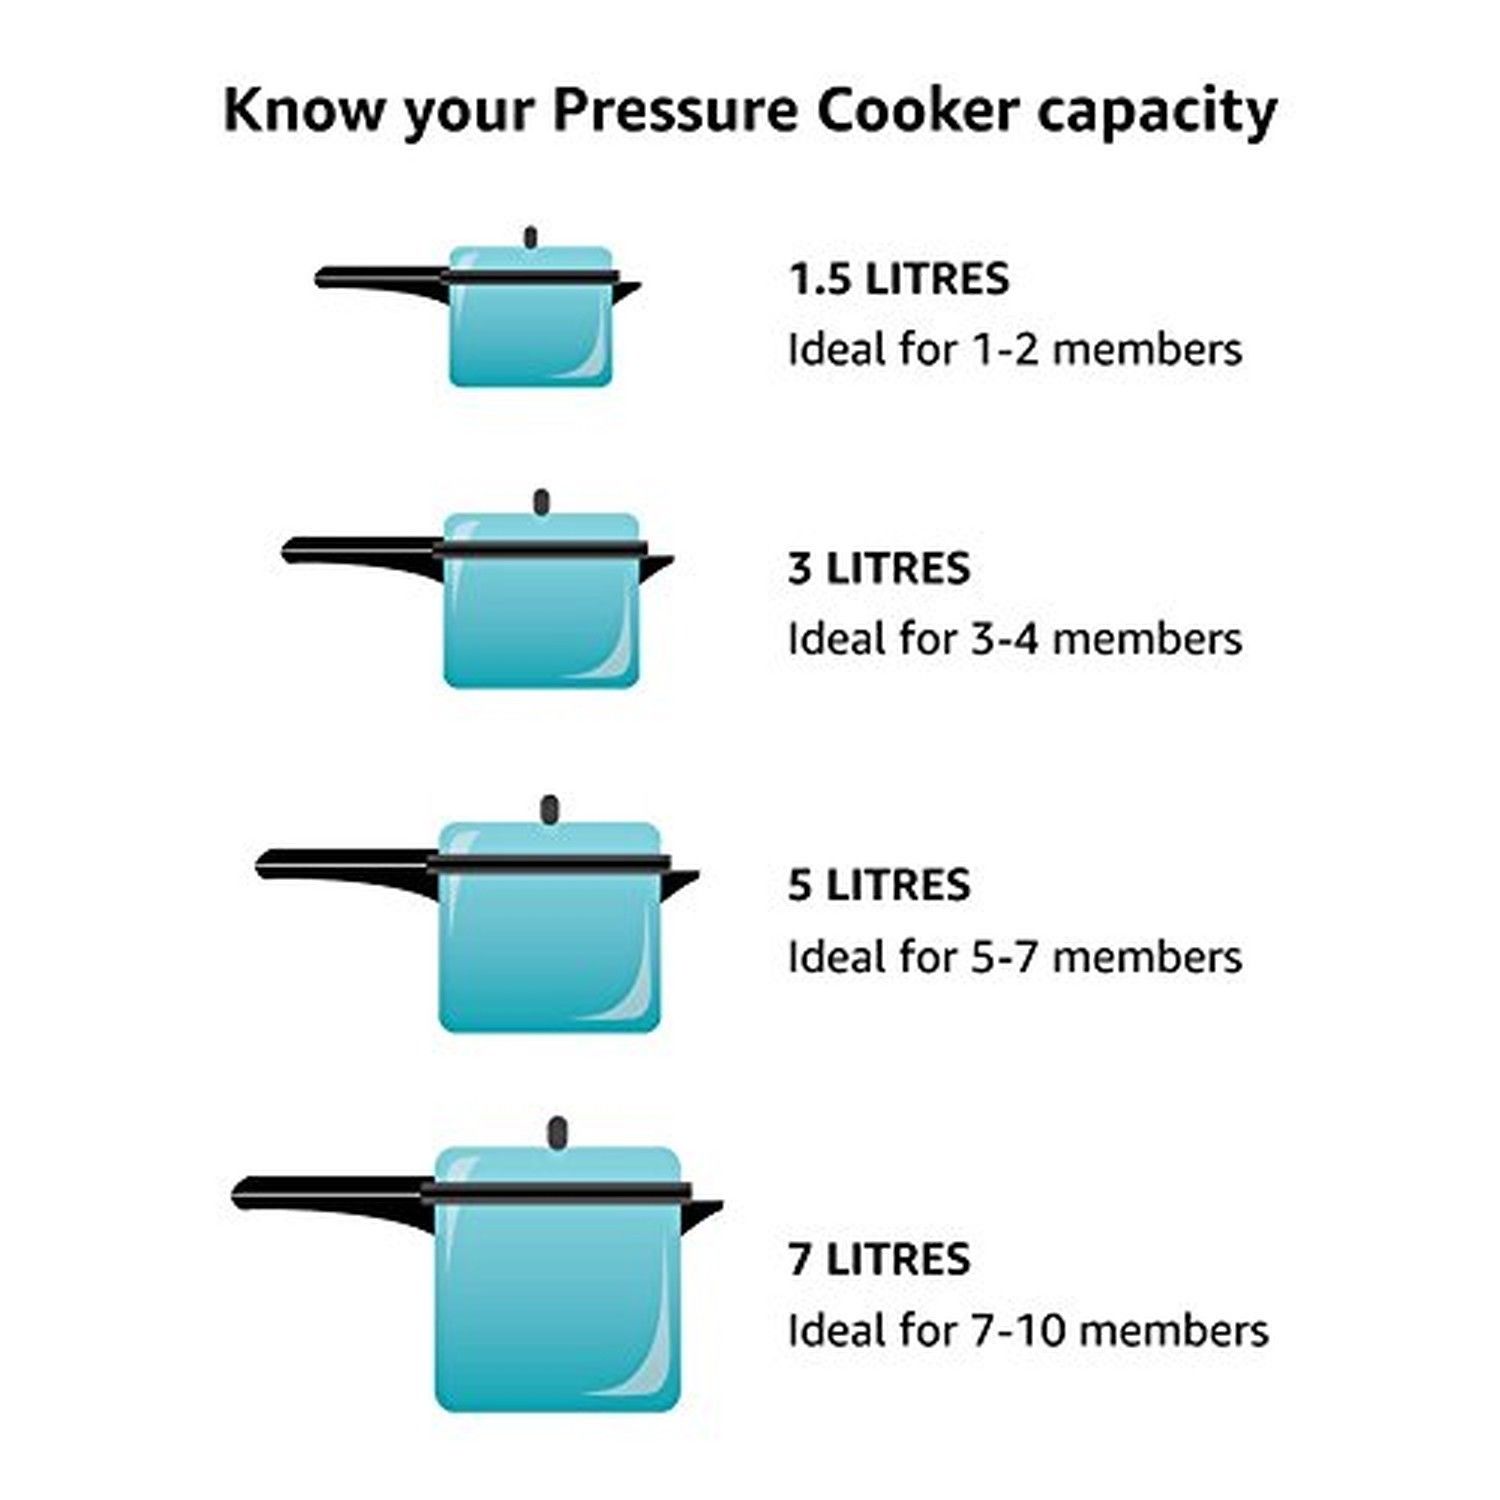 Picture of Prestige PRDAPC12 Medium Deluxe Plus New Flat Base Aluminum Pressure Cooker for Gas and Induction Stove Silver - 12 Litres